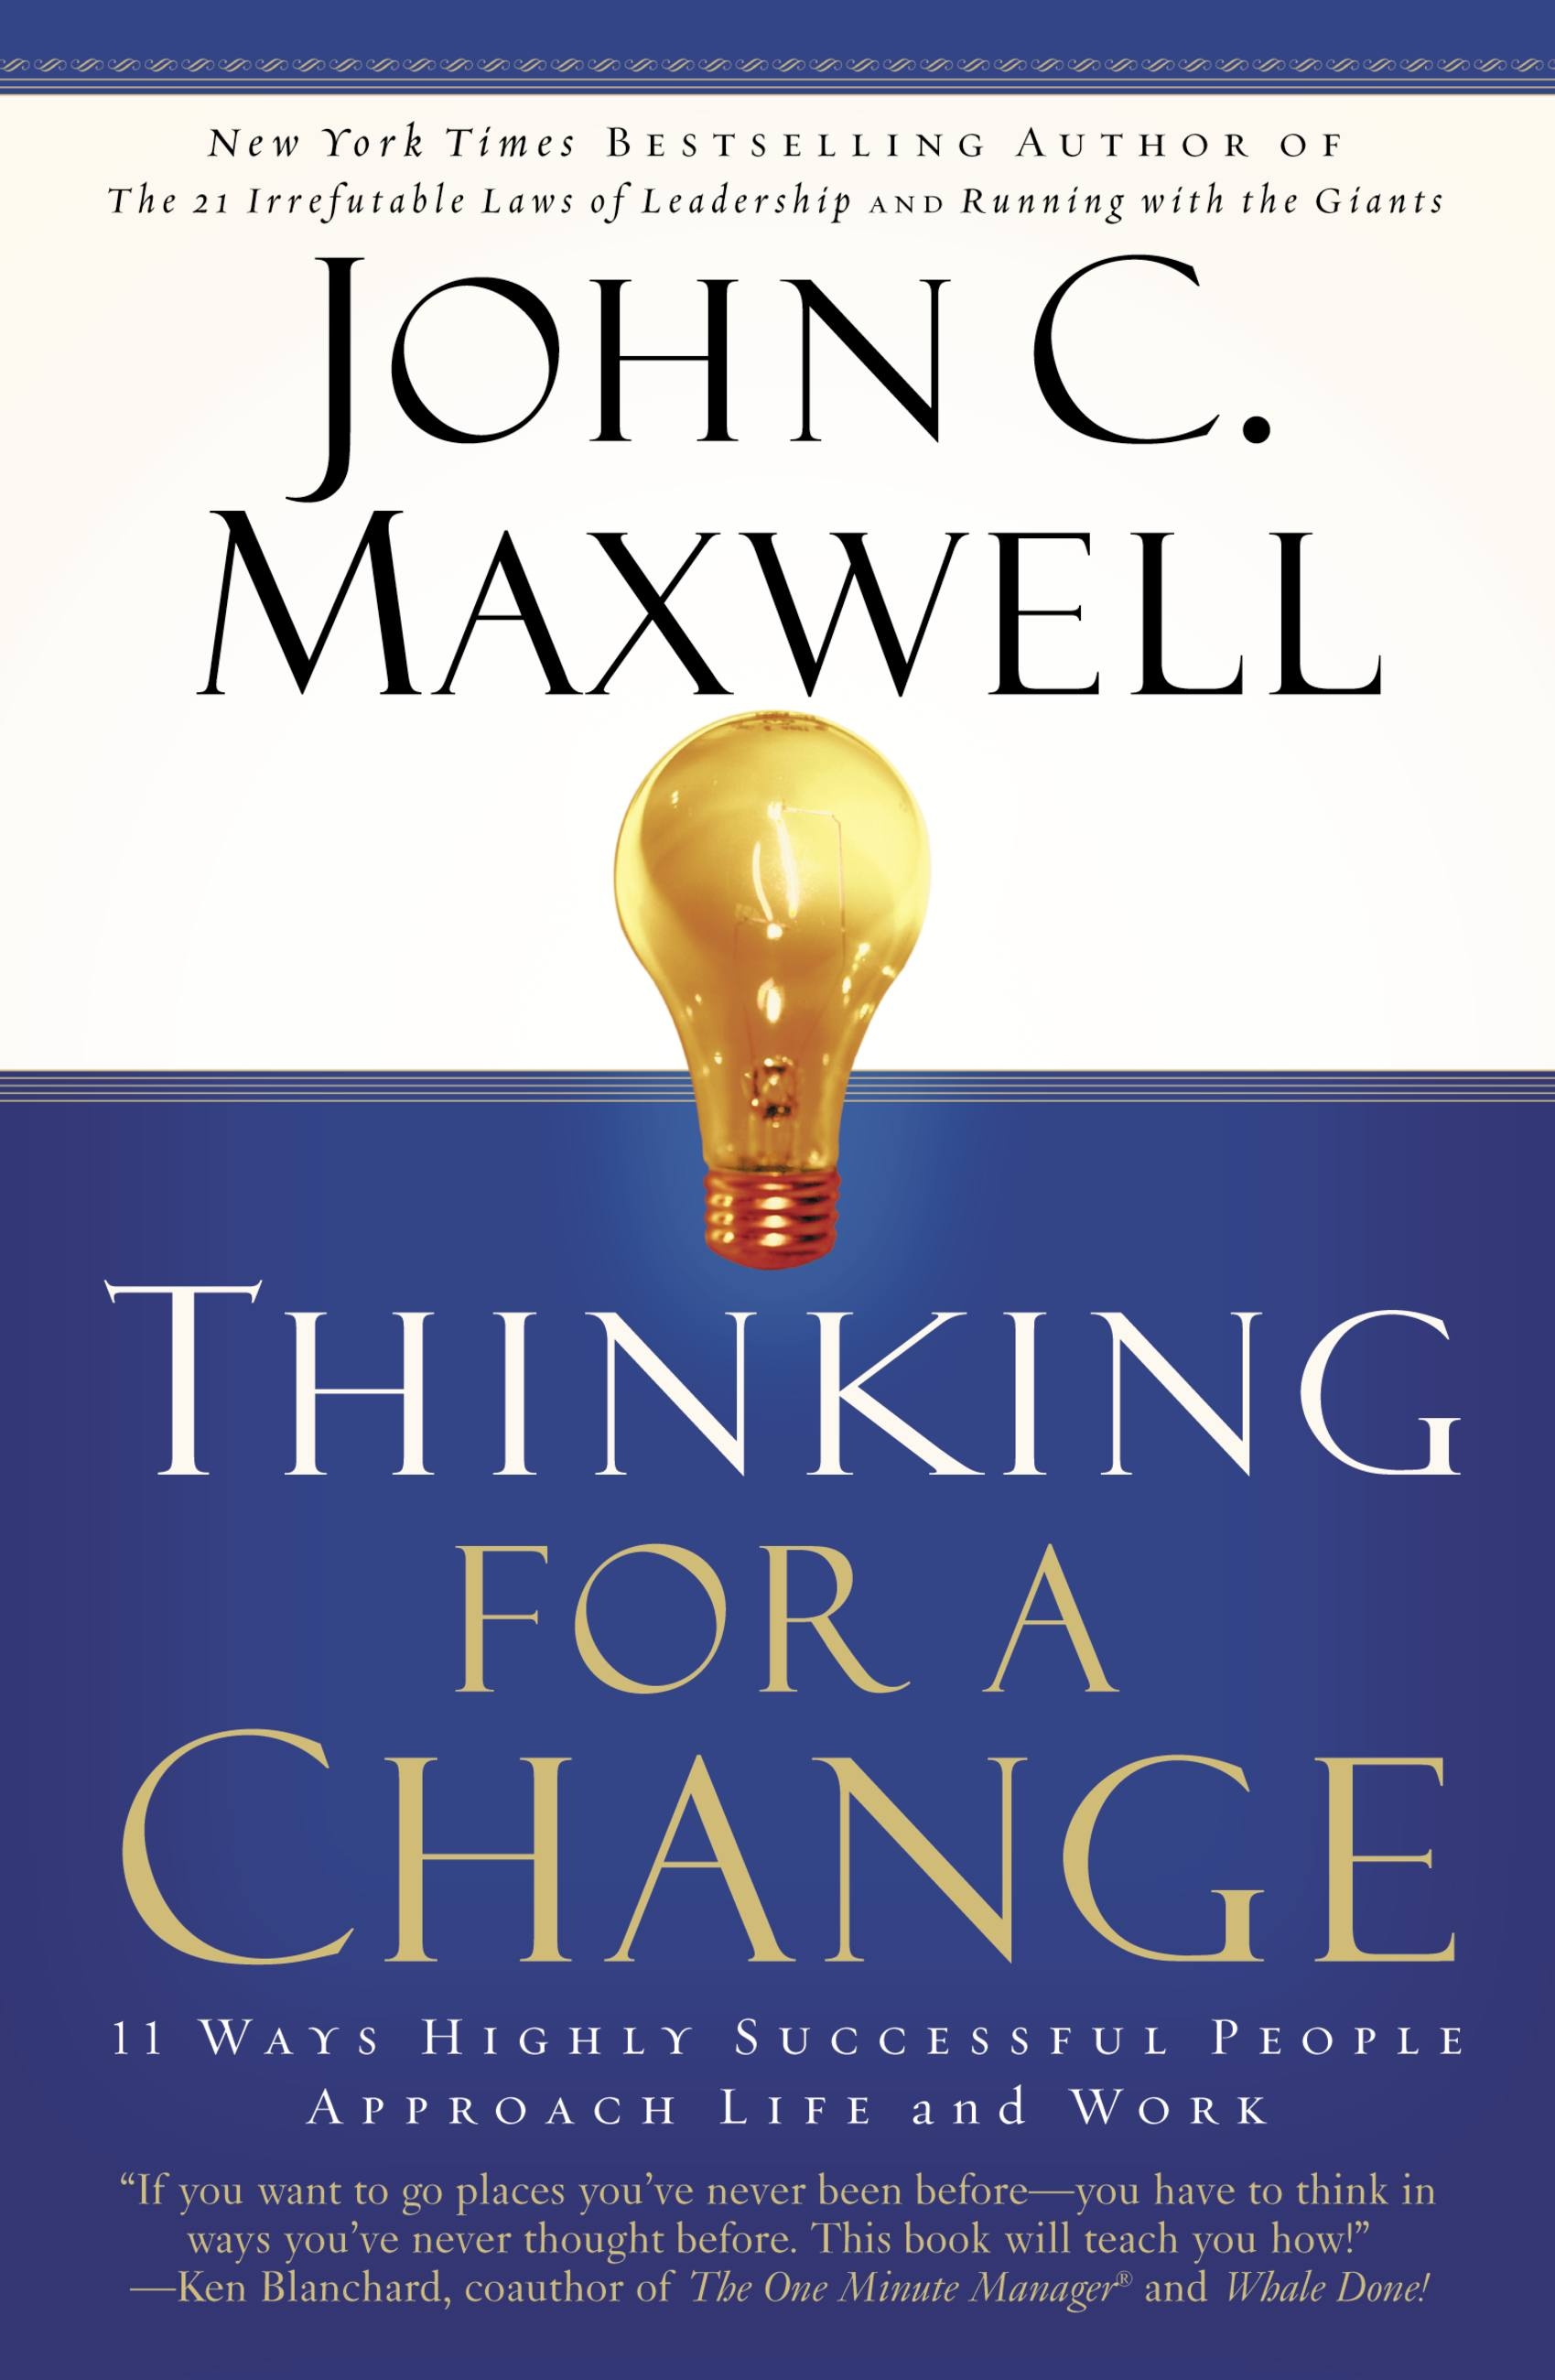 John　by　a　Book　Maxwell　Change　Group　C.　Hachette　Thinking　for